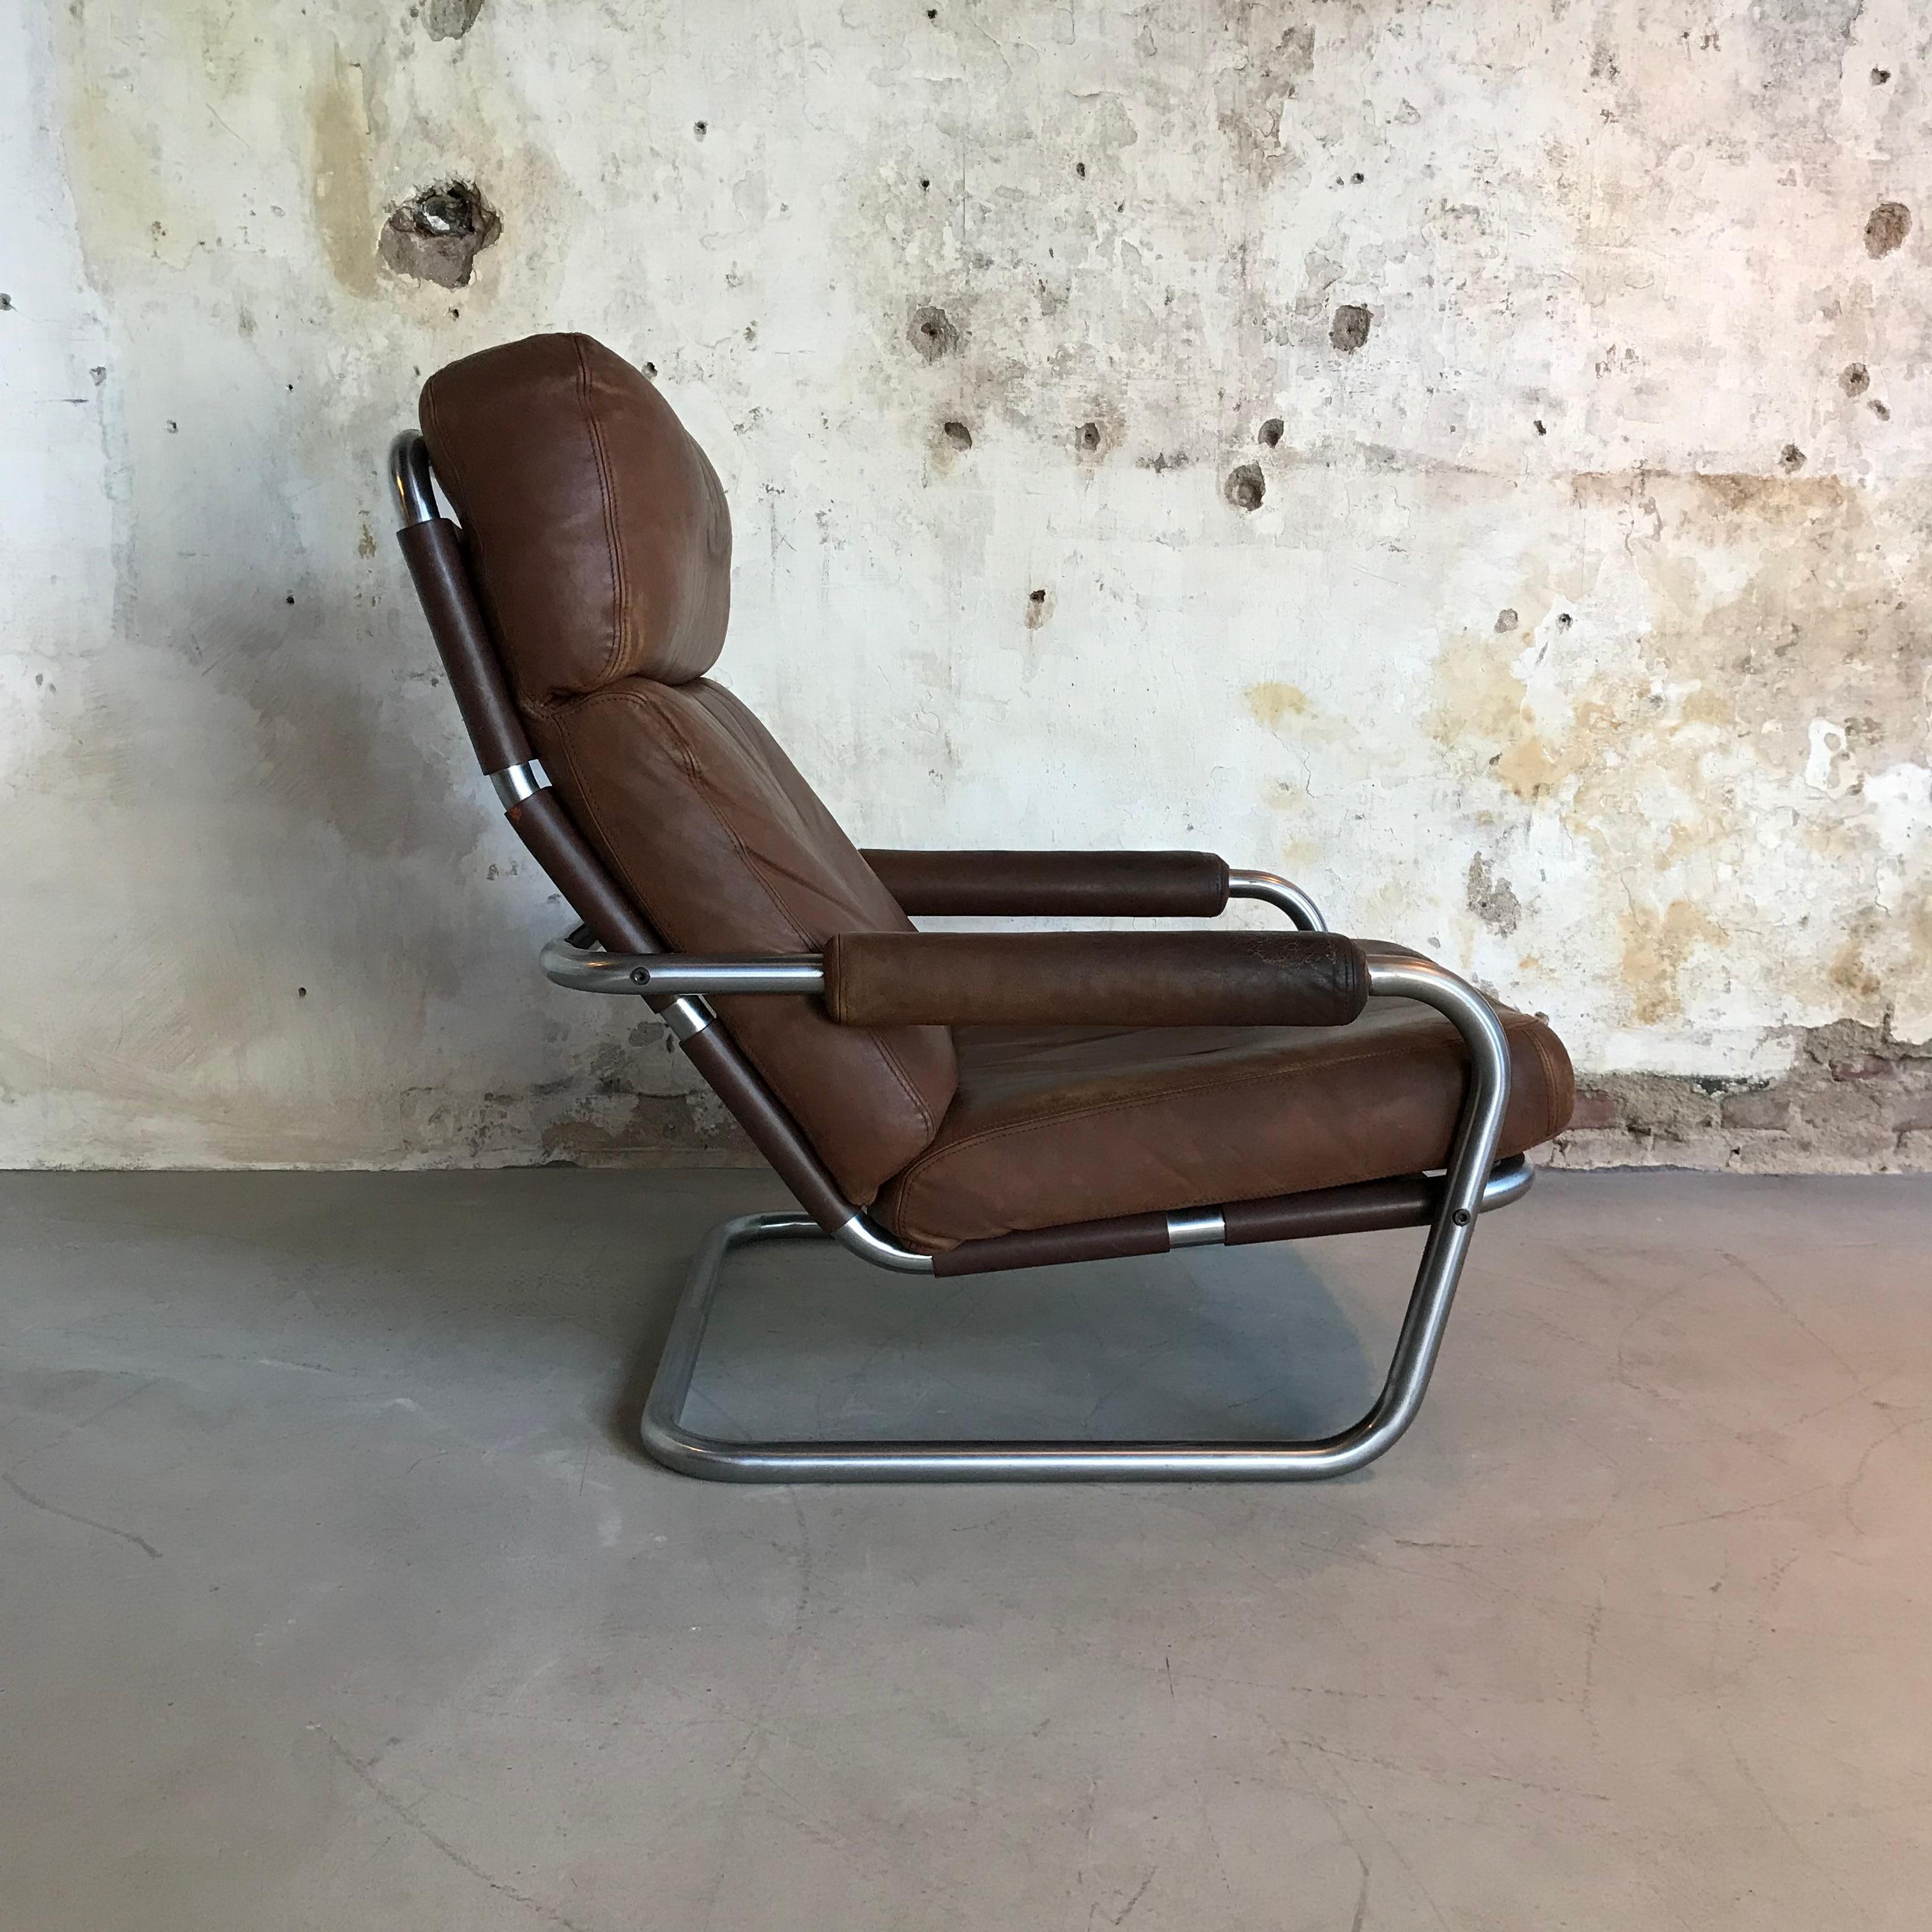 This very stunning low lounge chair was designed by Jan des Bouvrie and manufactured in the Netherlands by Gelderland during the early 1970s. The chair is named 